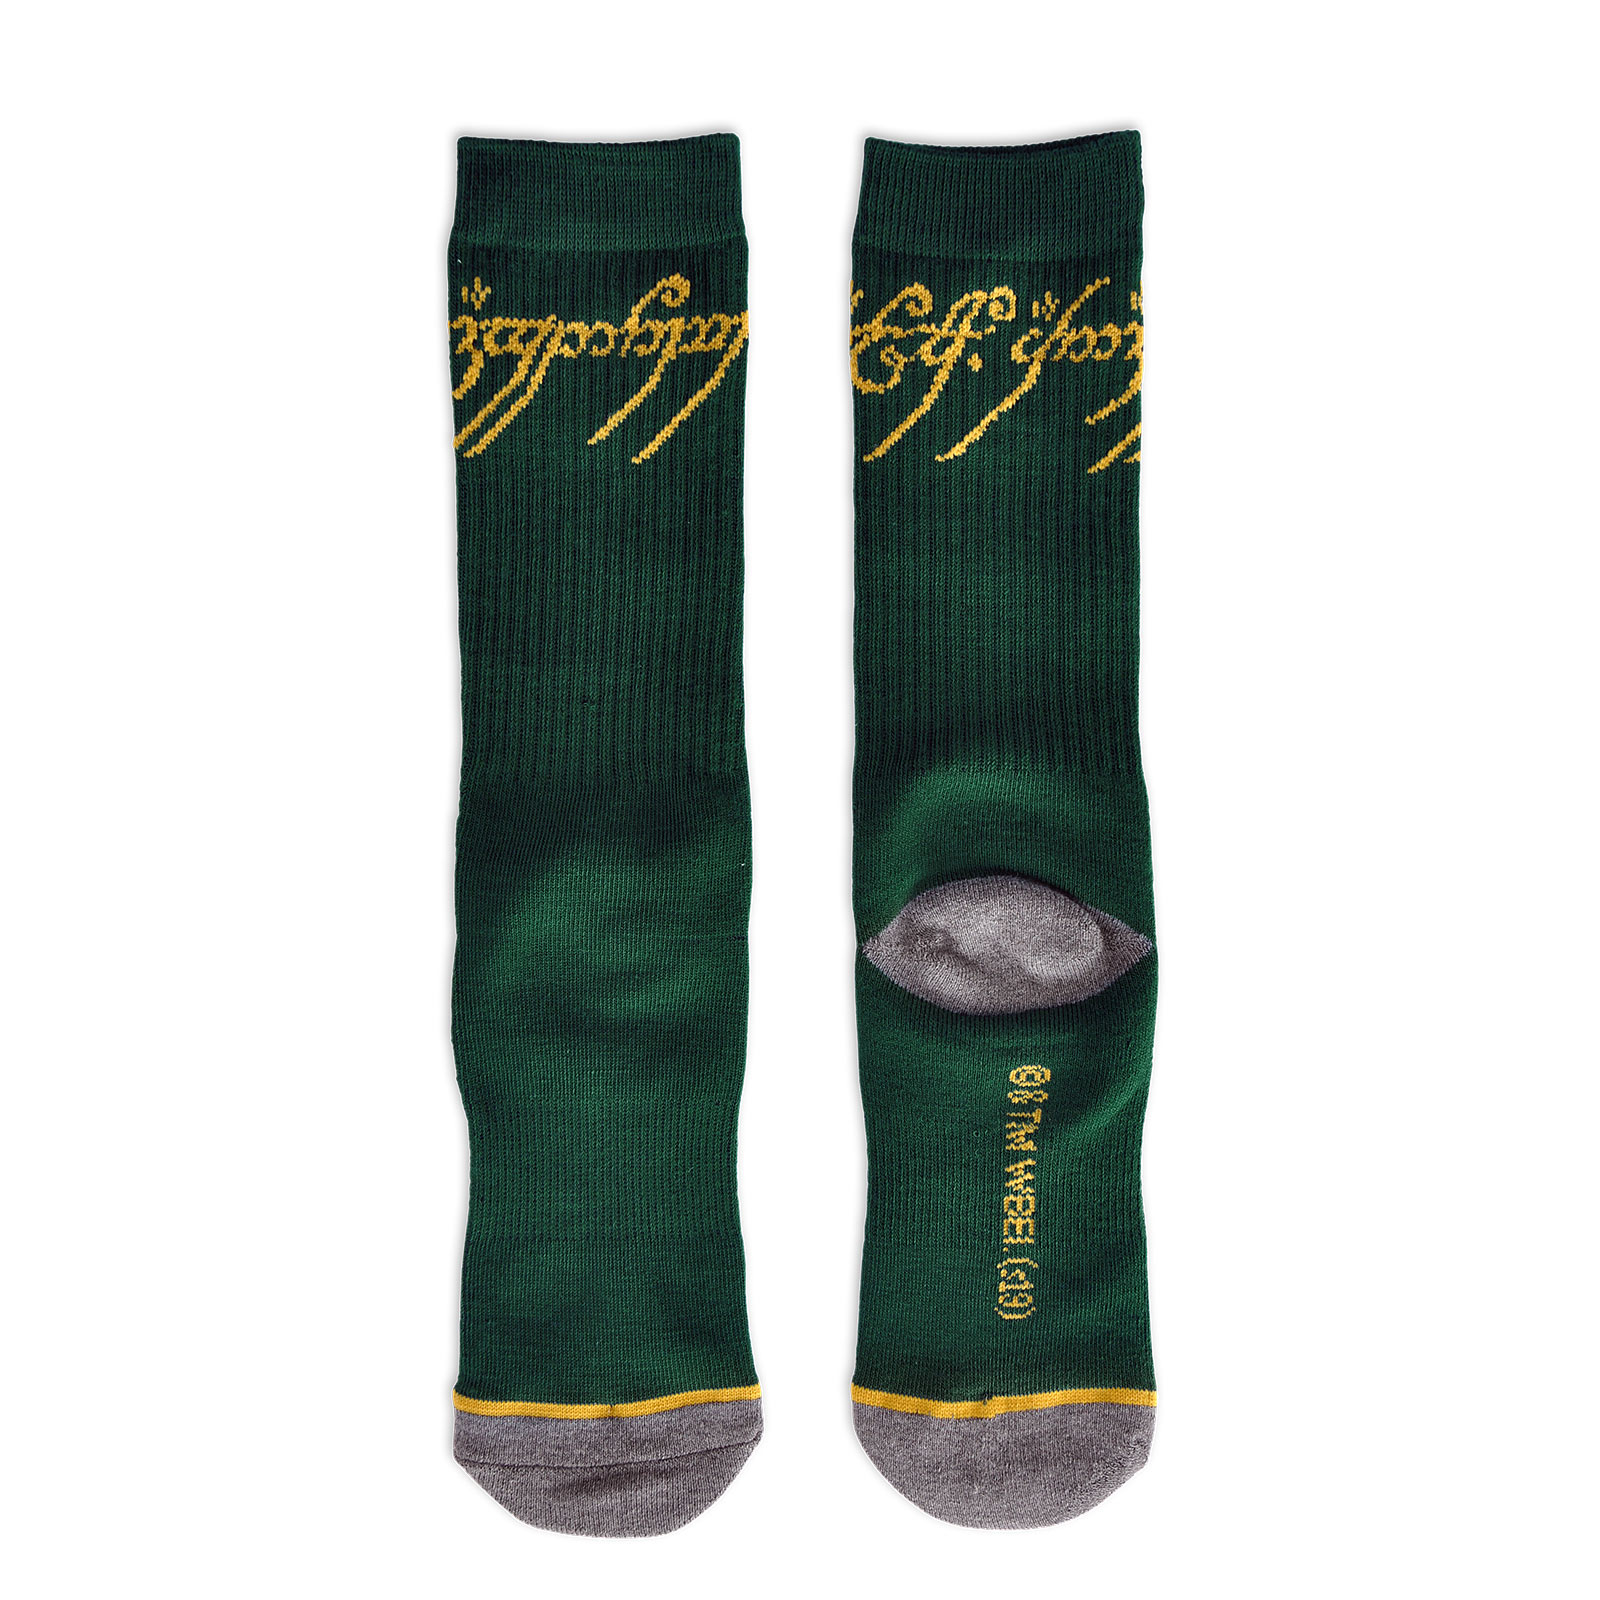 Lord of the Rings - The One Ring Socks